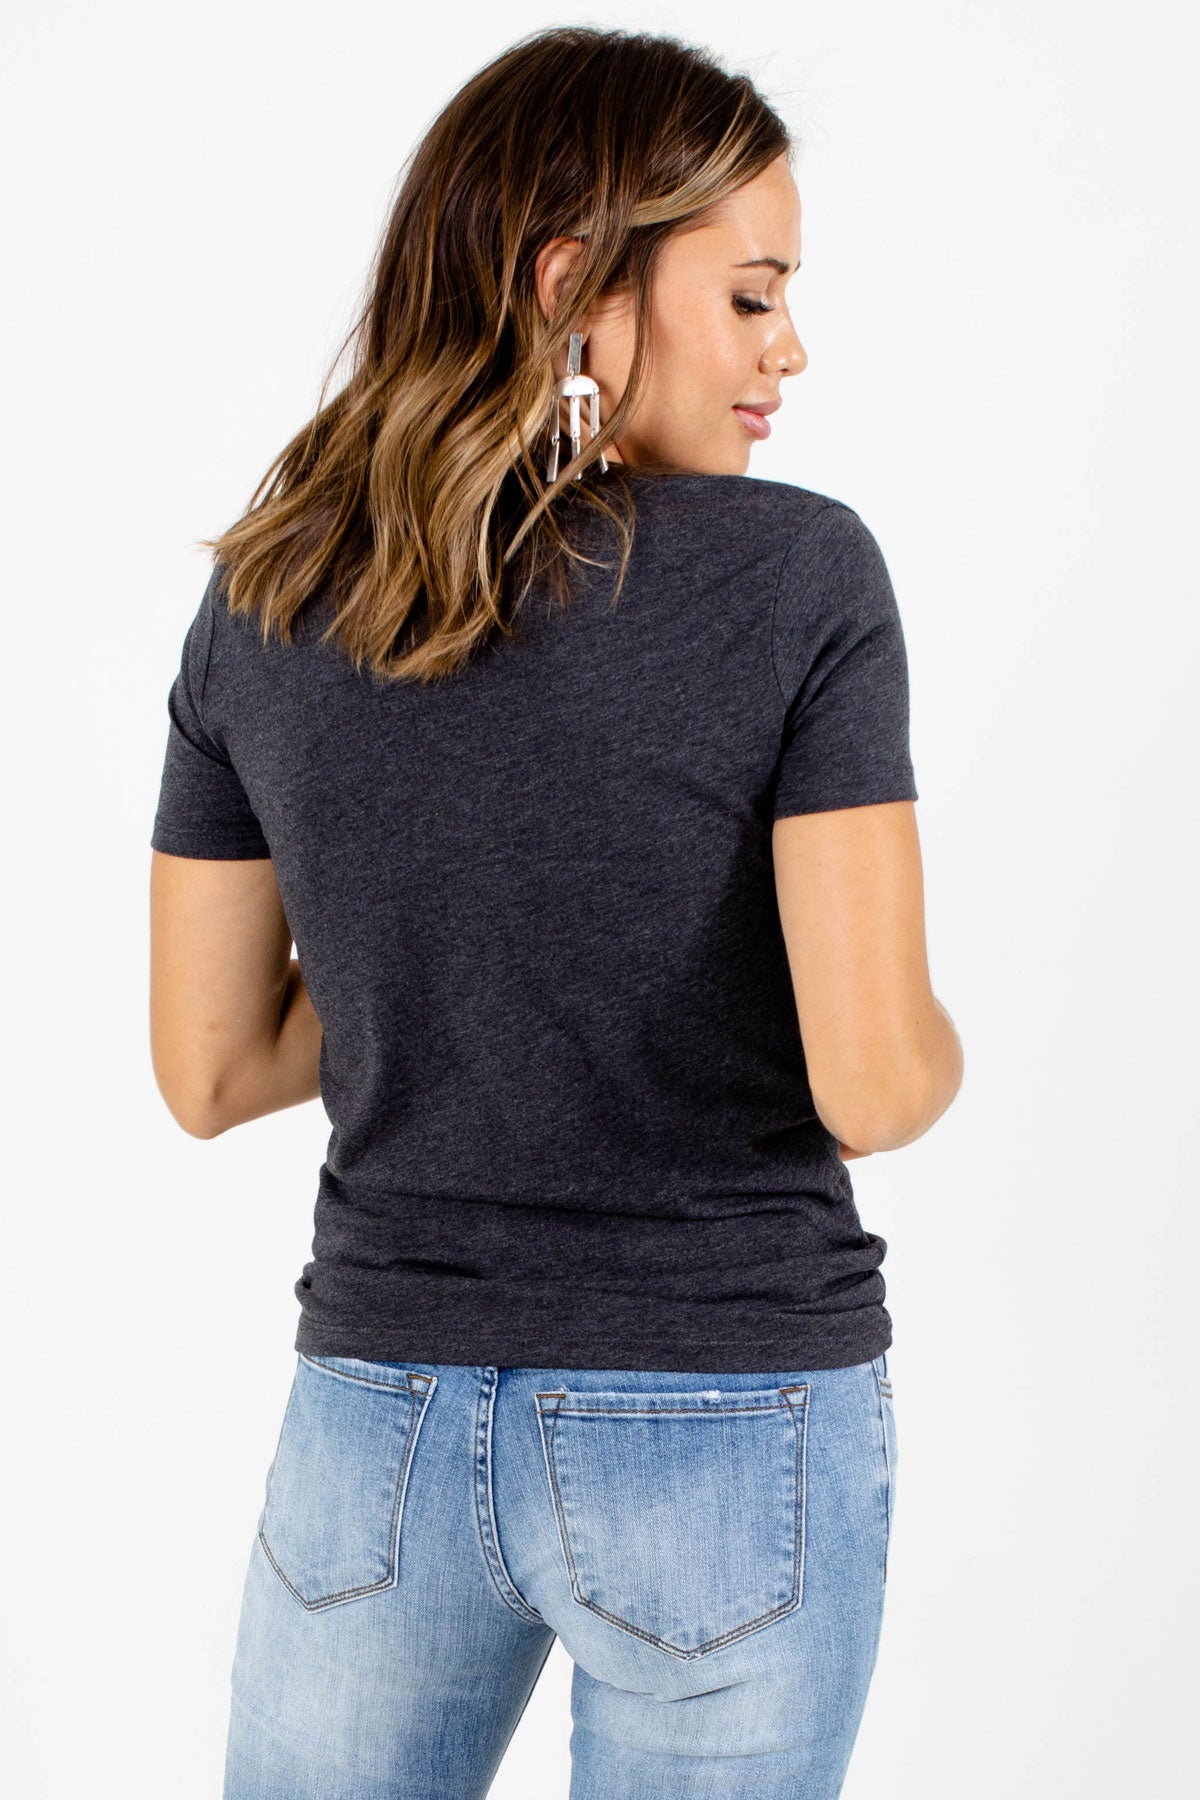 Women's Gray "Free Spirit" Lettering Boutique Graphic Tee